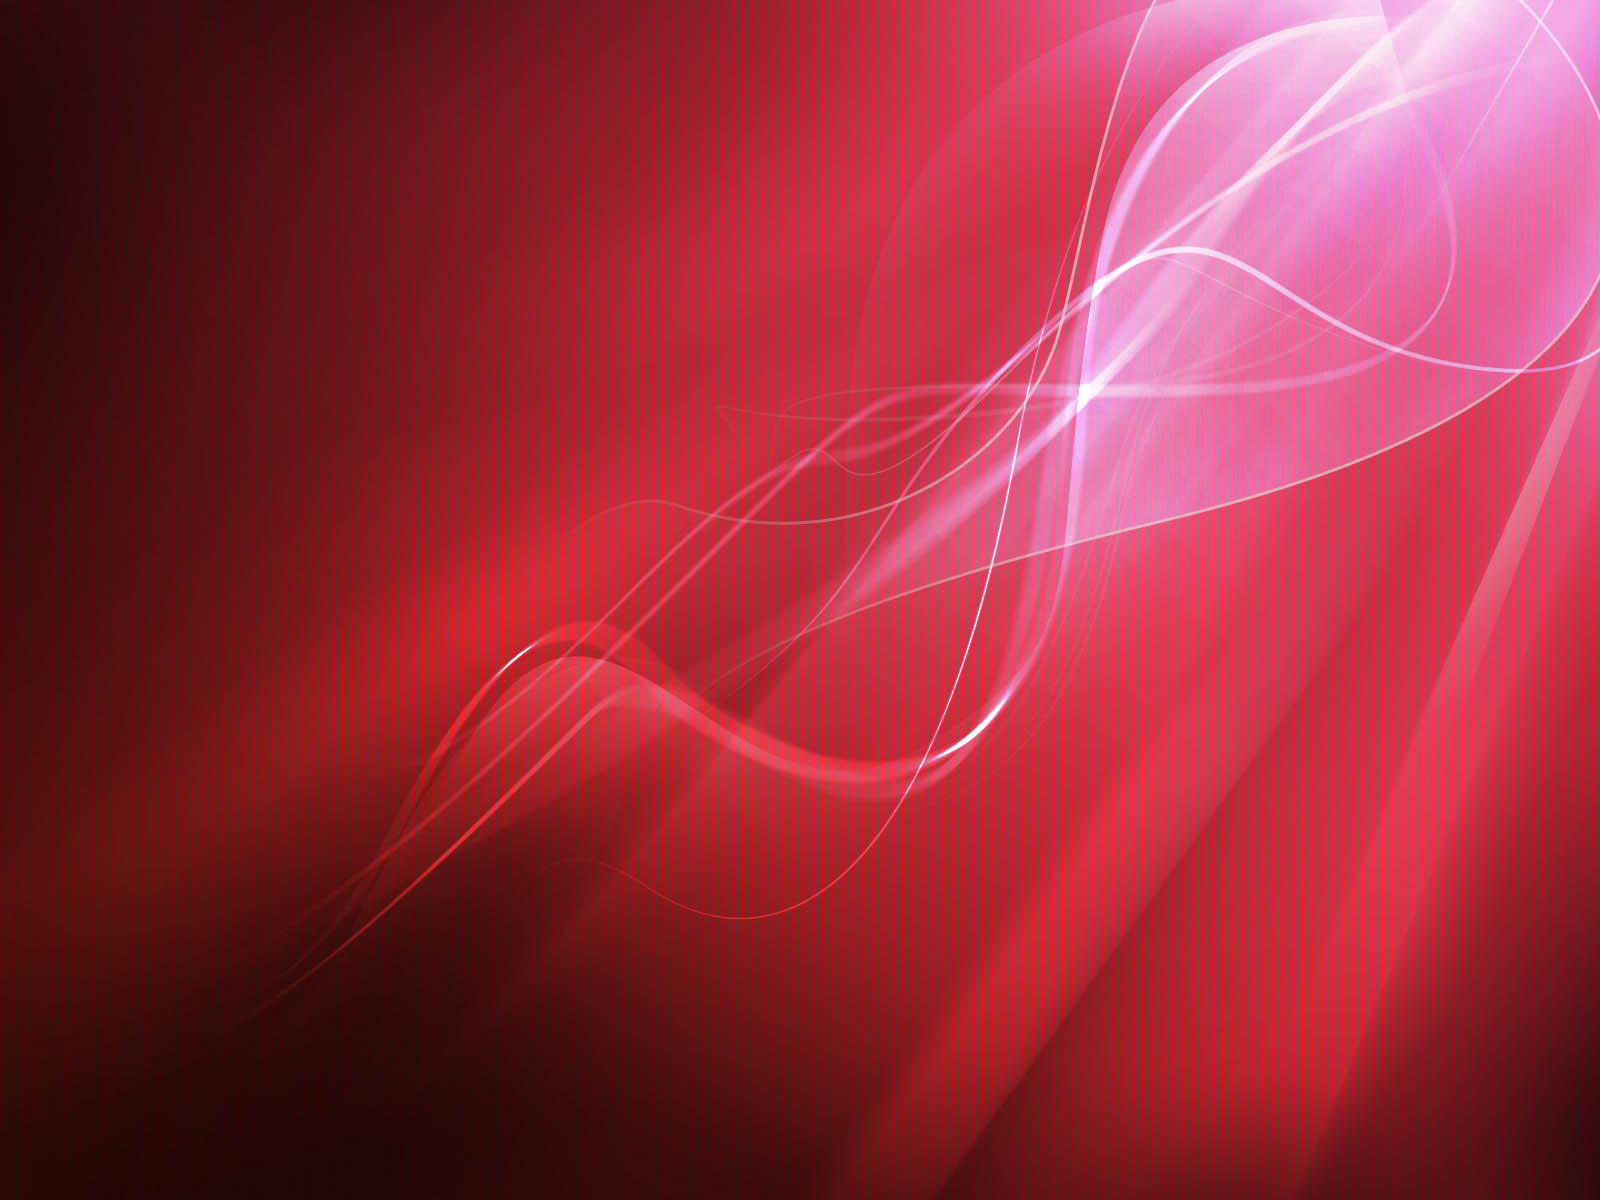 Gallery Mangklex Abstract Red Wallpapers HOT 2013 Popular